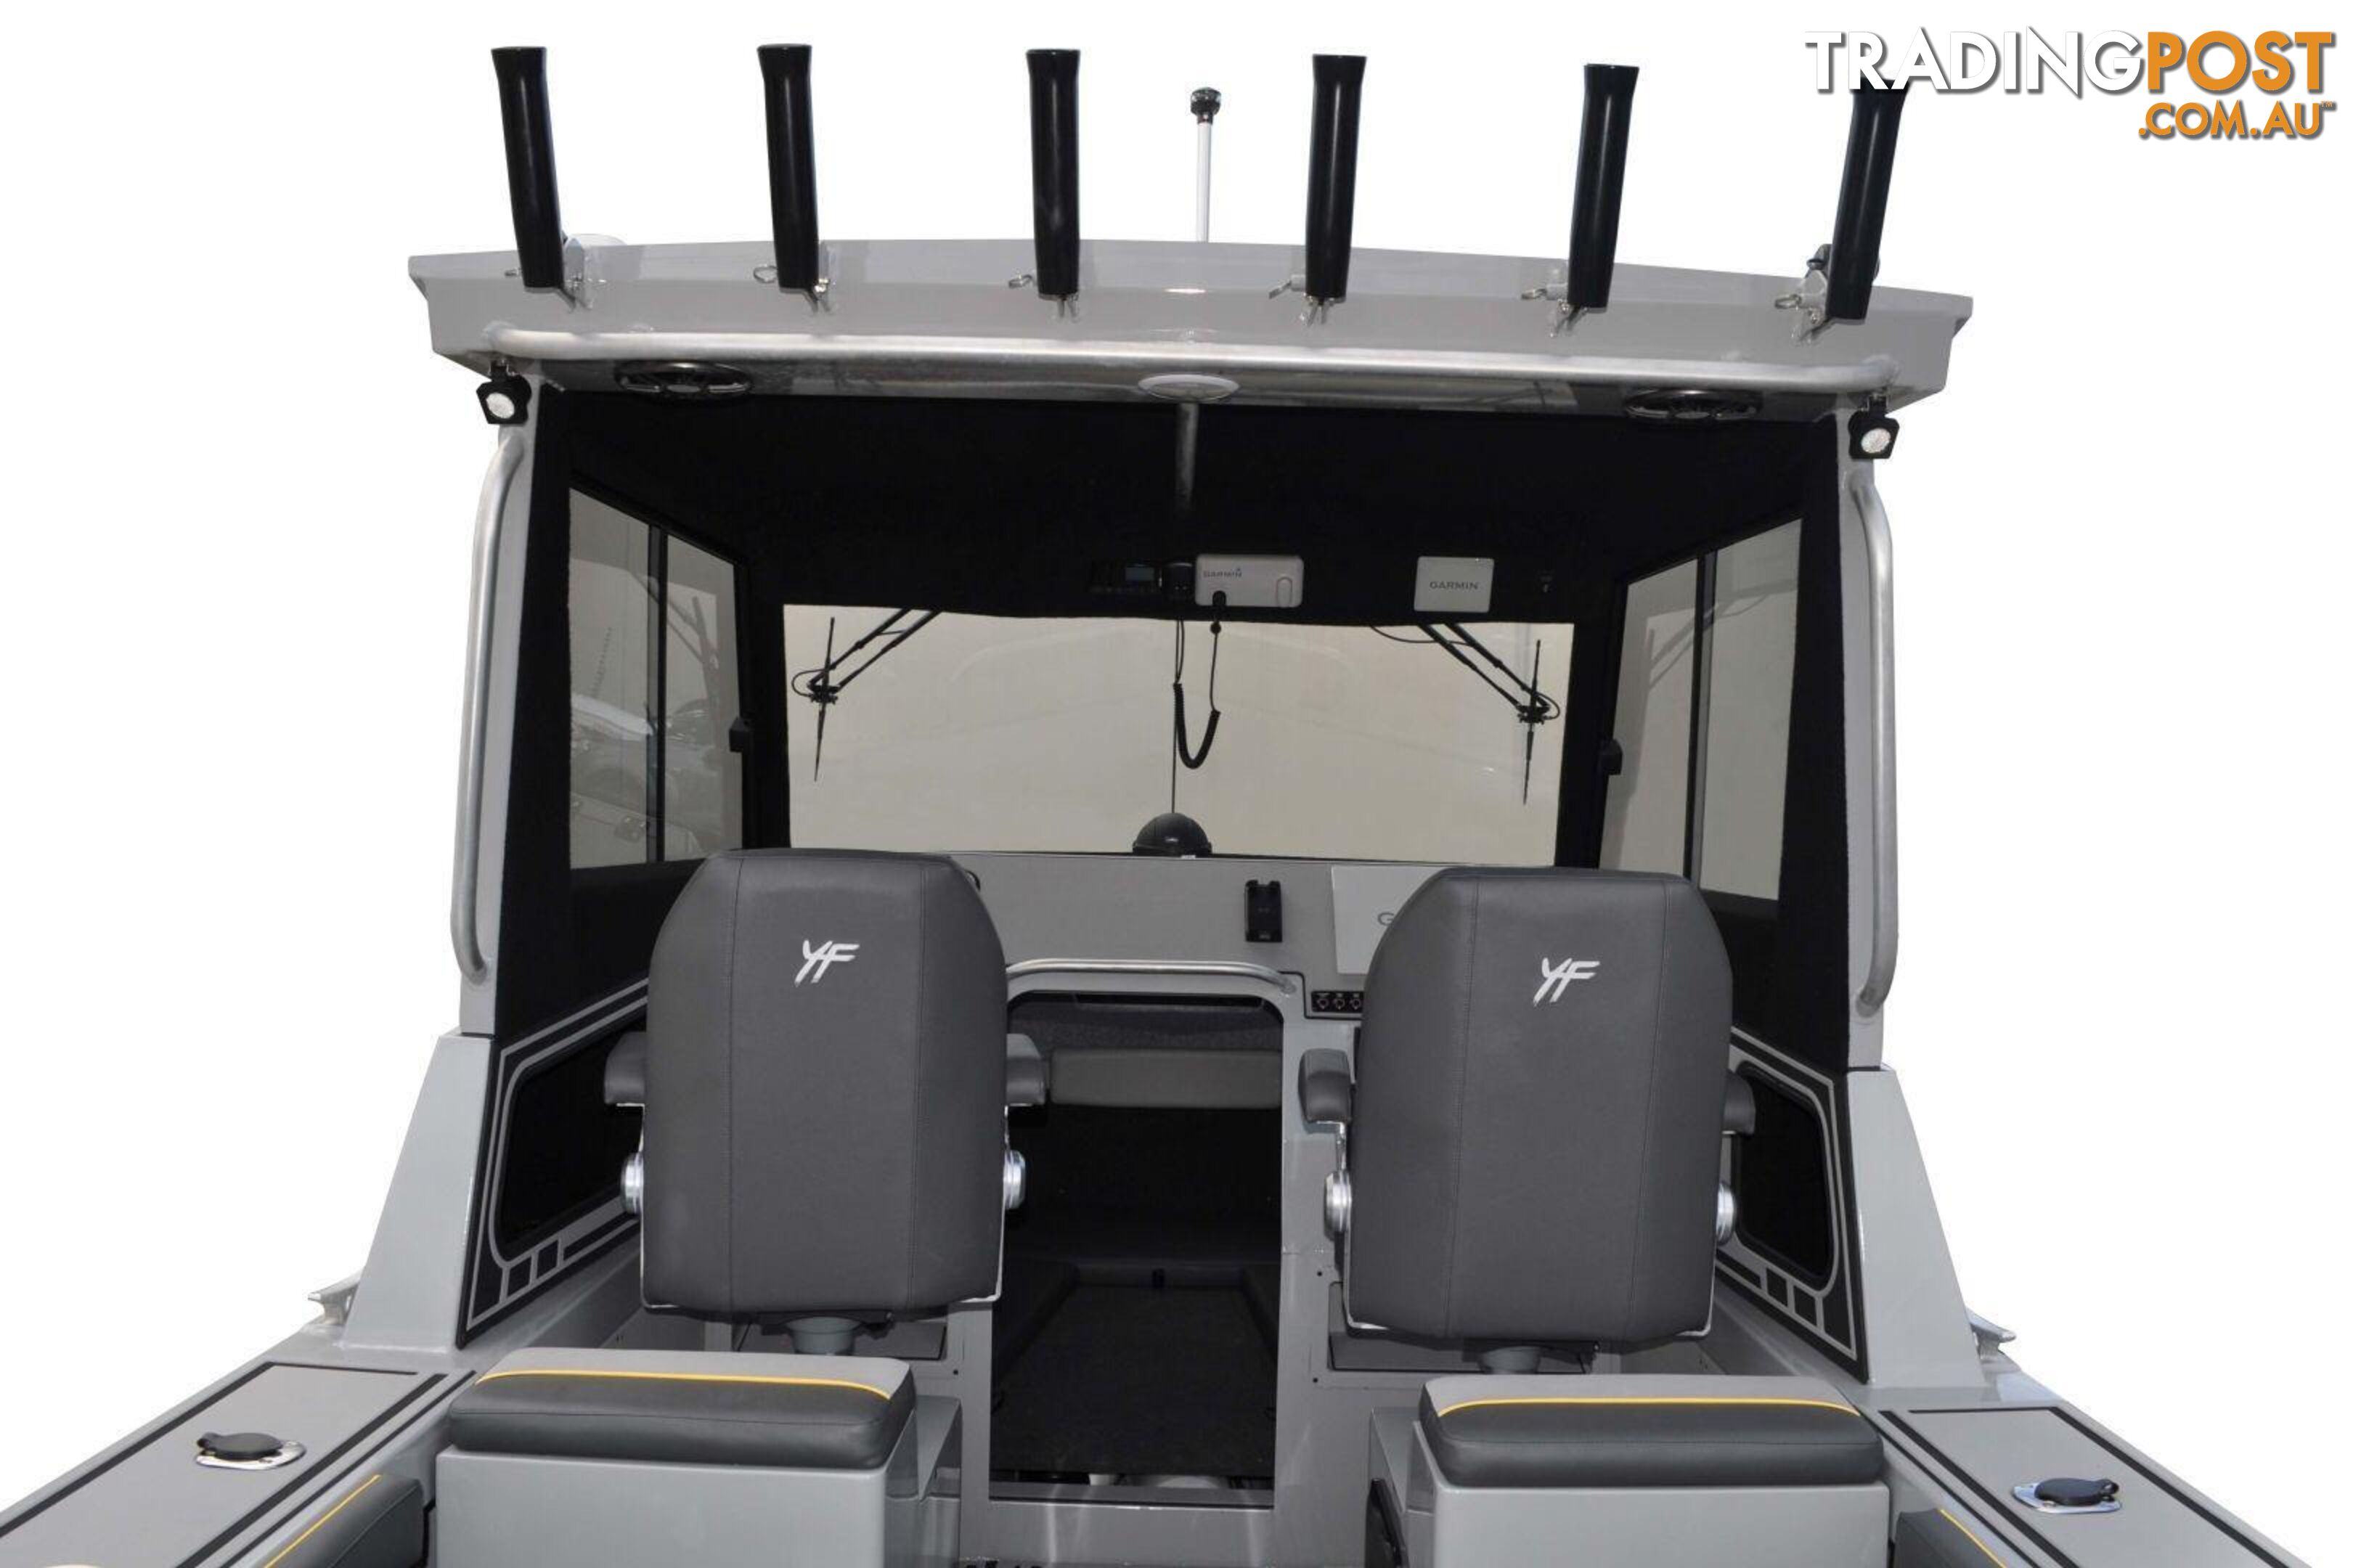 Yellowfin YF-70 Extended Cabin + Yamaha F225hp 4-Stroke - Pack 3 for sale online prices